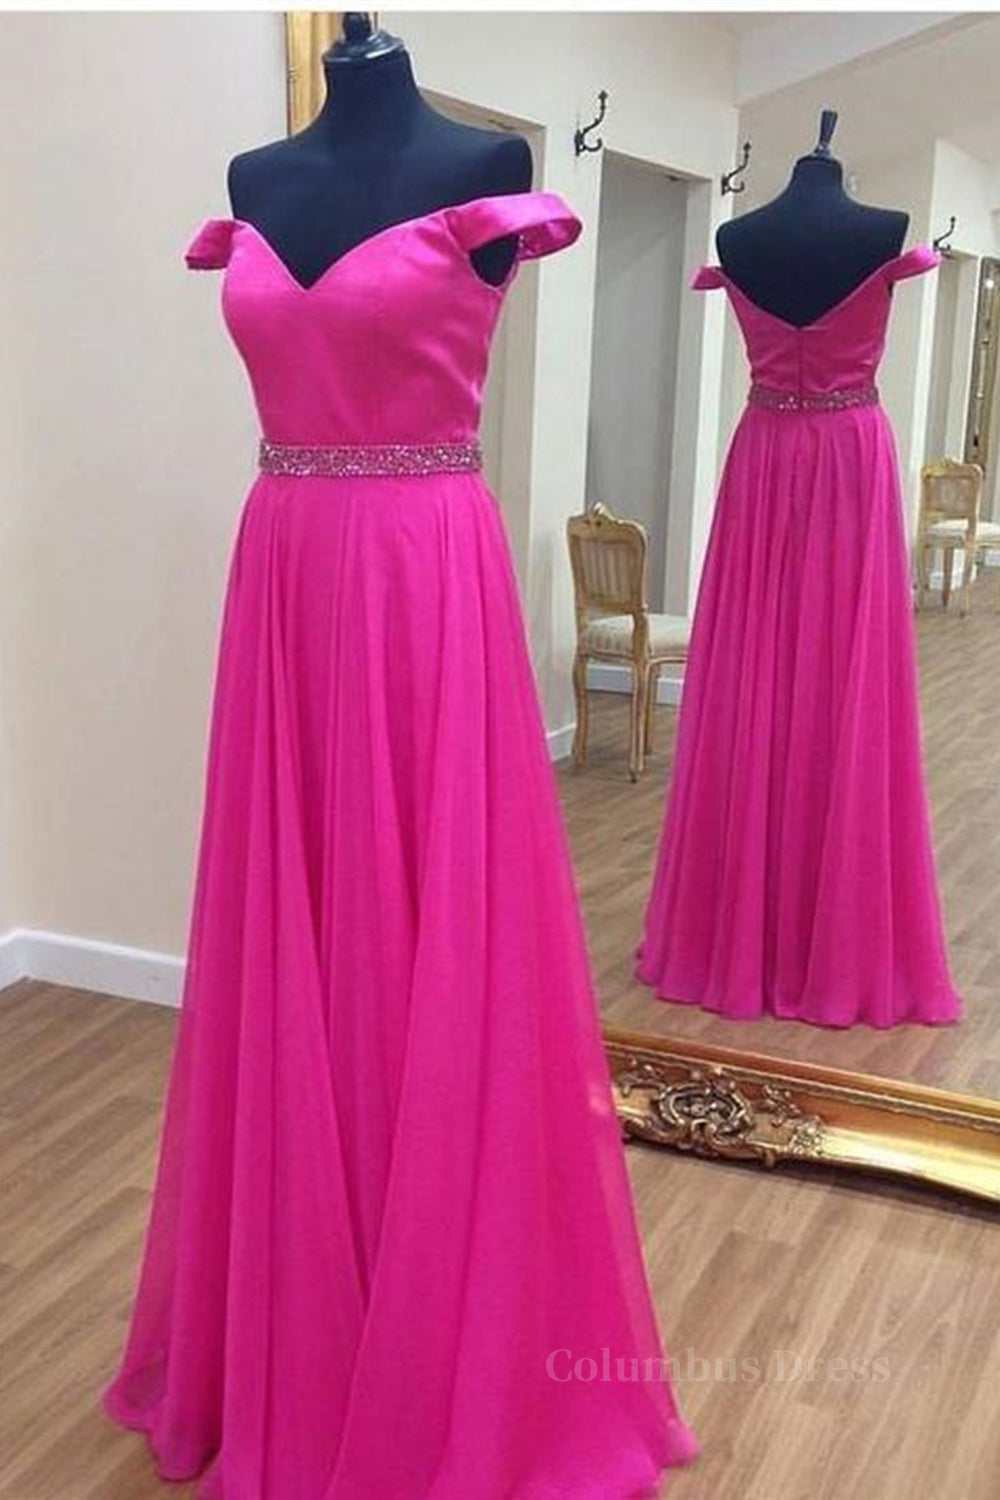 Off the Shoulder Fuchsia Long Corset Prom Dresses with Belt, Off Shoulder Fuchsia Corset Formal Evening Dresses outfit, Black Tie Dress